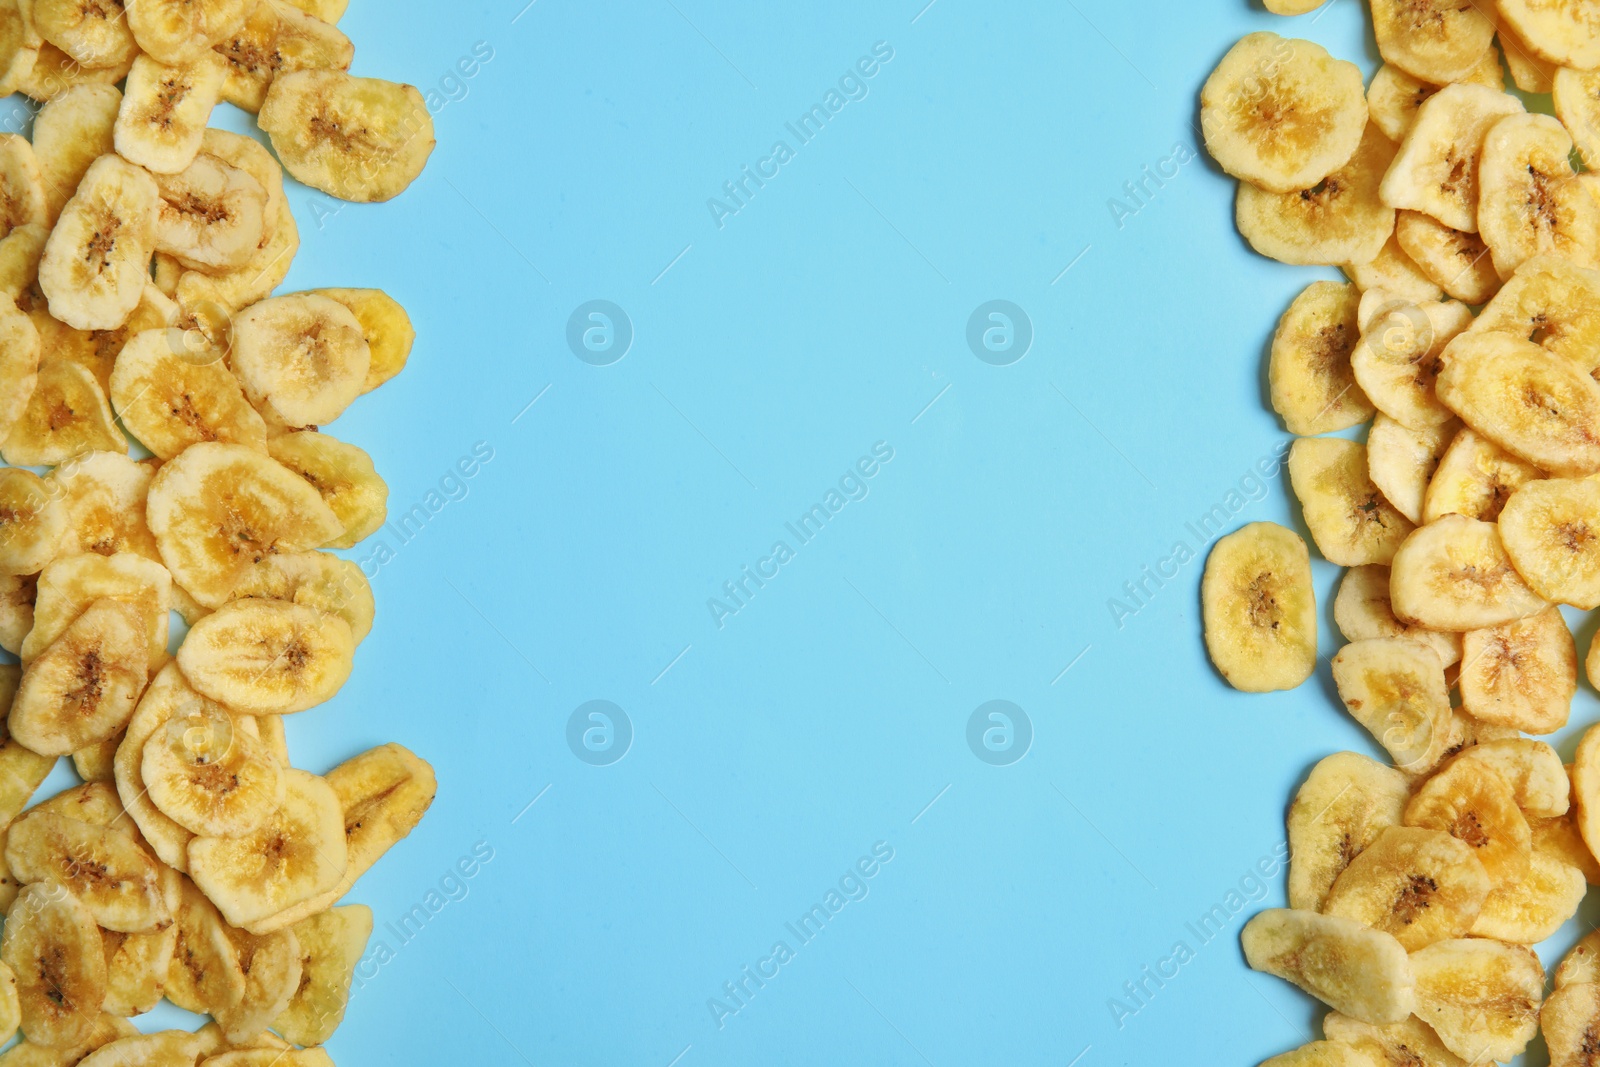 Photo of Frame made of sweet banana slices on color  background, top view with space for text. Dried fruit as healthy snack